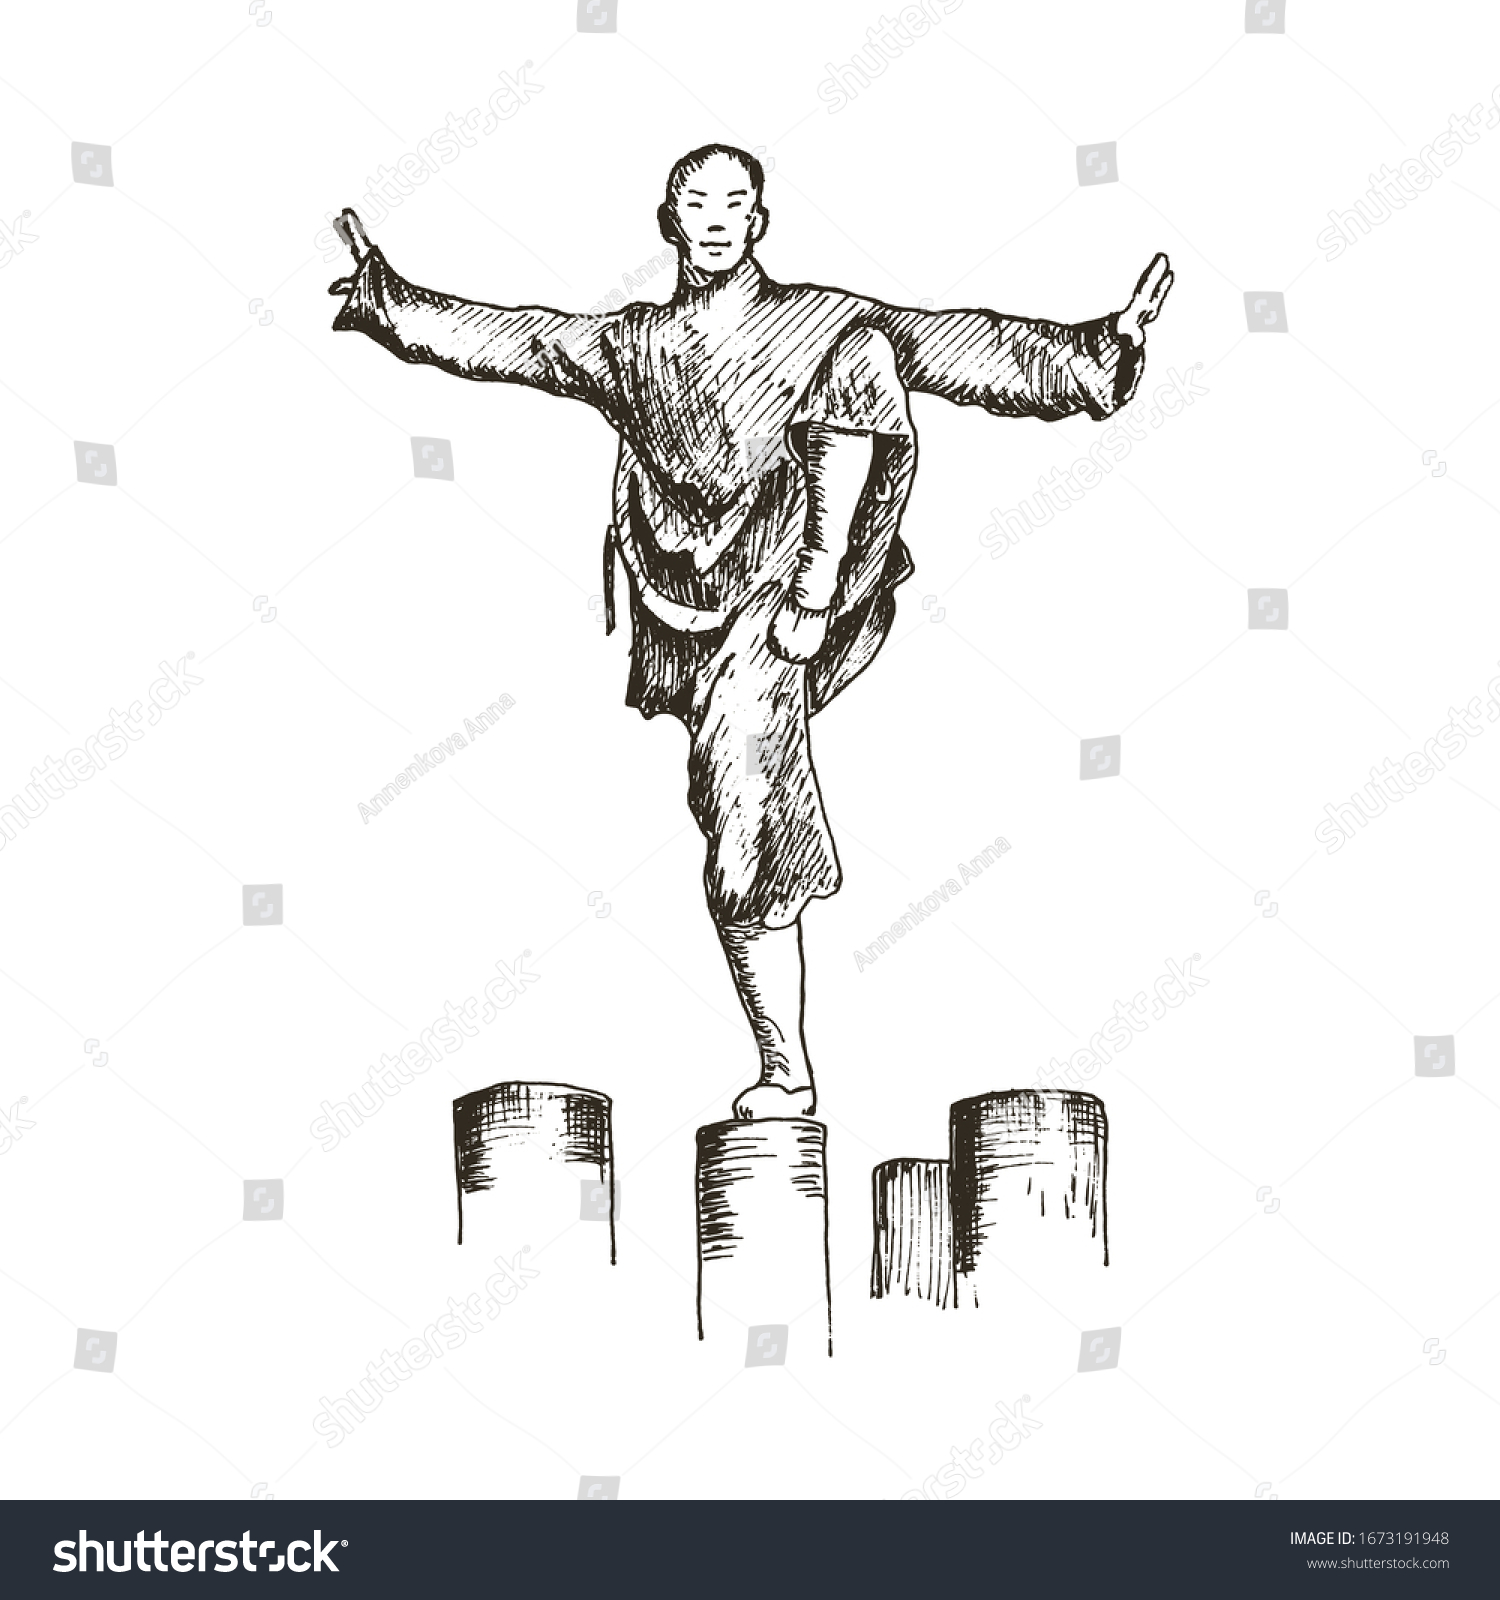 697 Drawing shaolin Images, Stock Photos & Vectors | Shutterstock